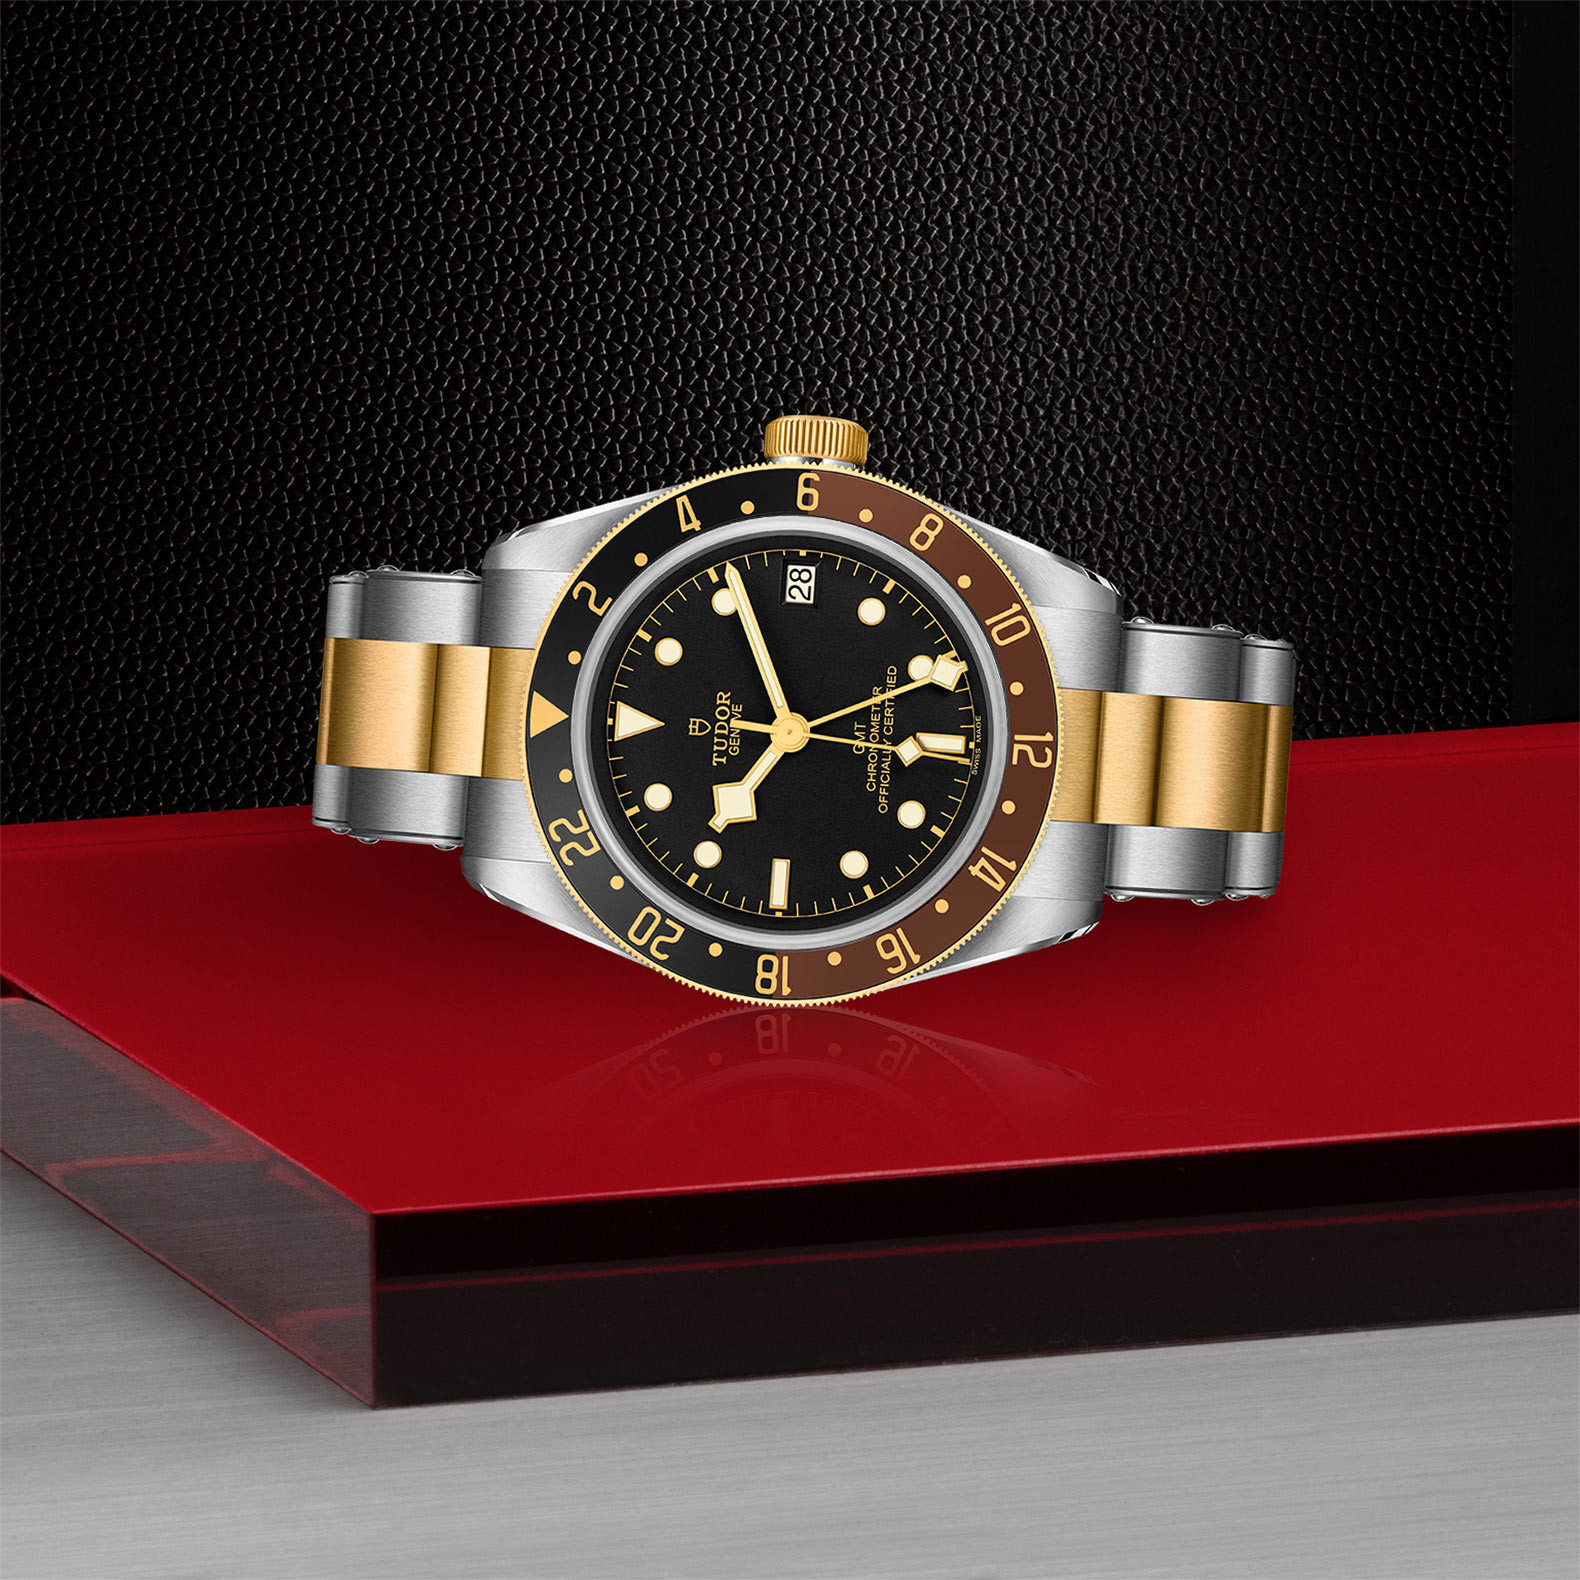 TUDOR Black Bay GMT S&G with Steel Case and Steel And Yellow Gold Bracelet - 41mm M79833MN-0001 Watch in Store Laying Down